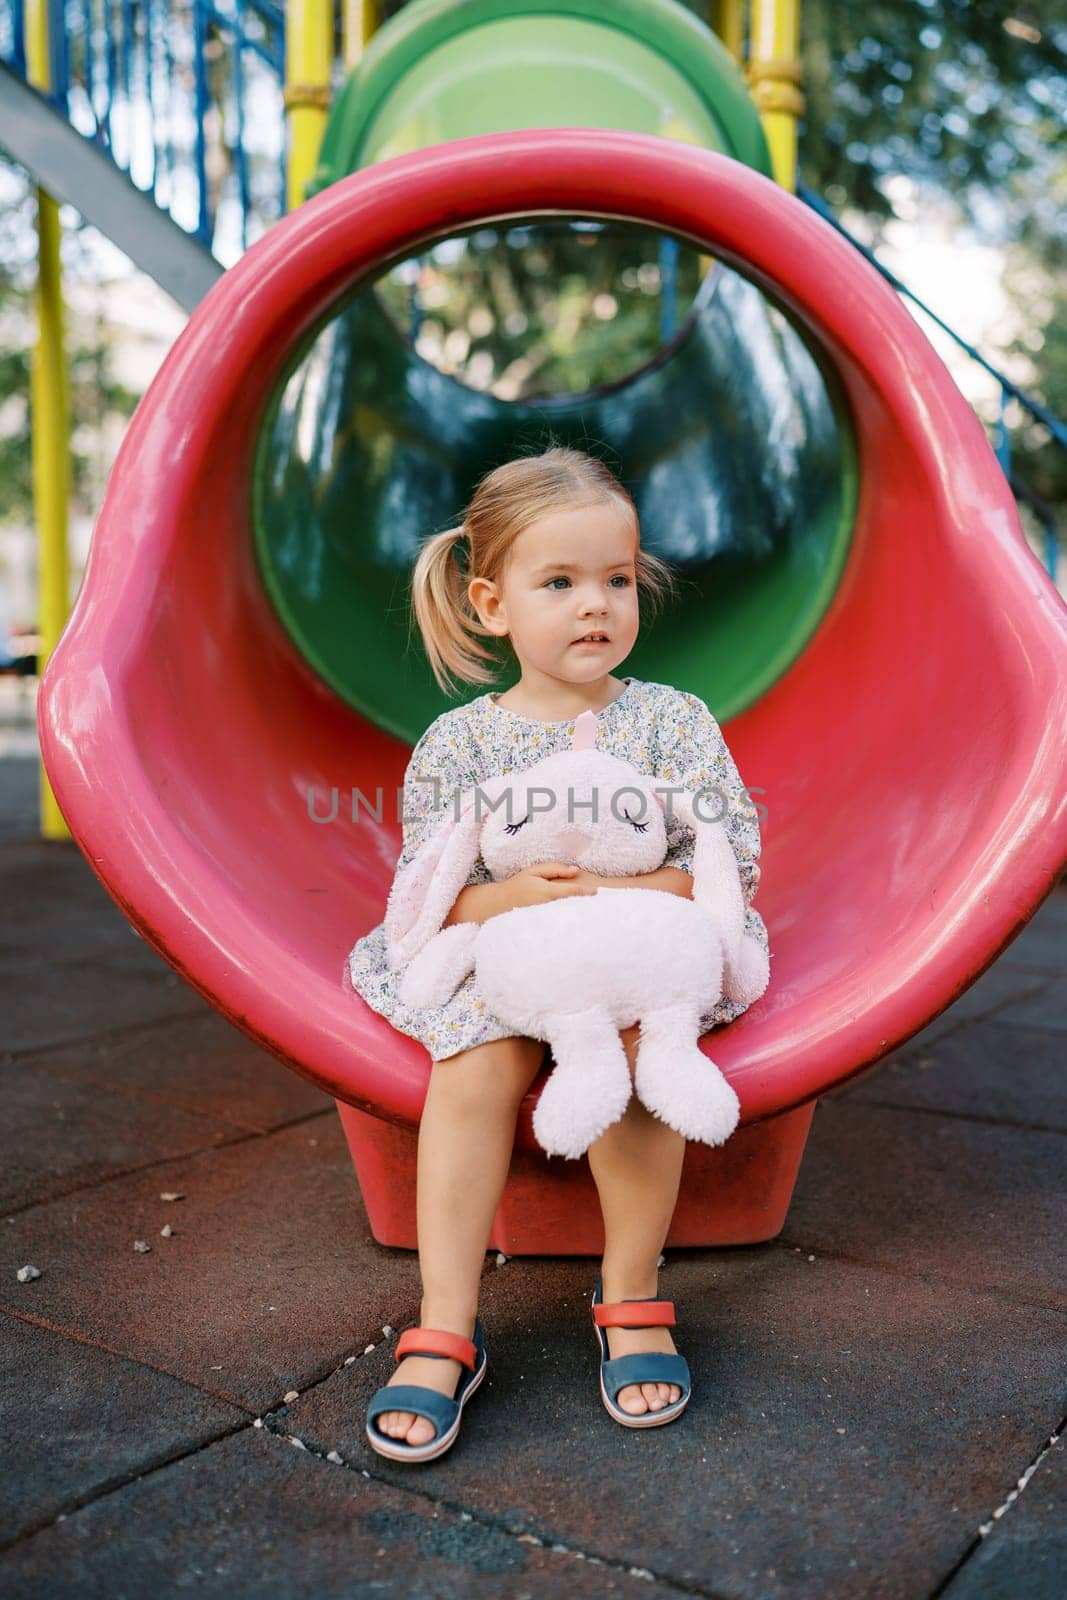 Little girl with a toy pink rabbit sits on a tube slide and looks into the distance by Nadtochiy